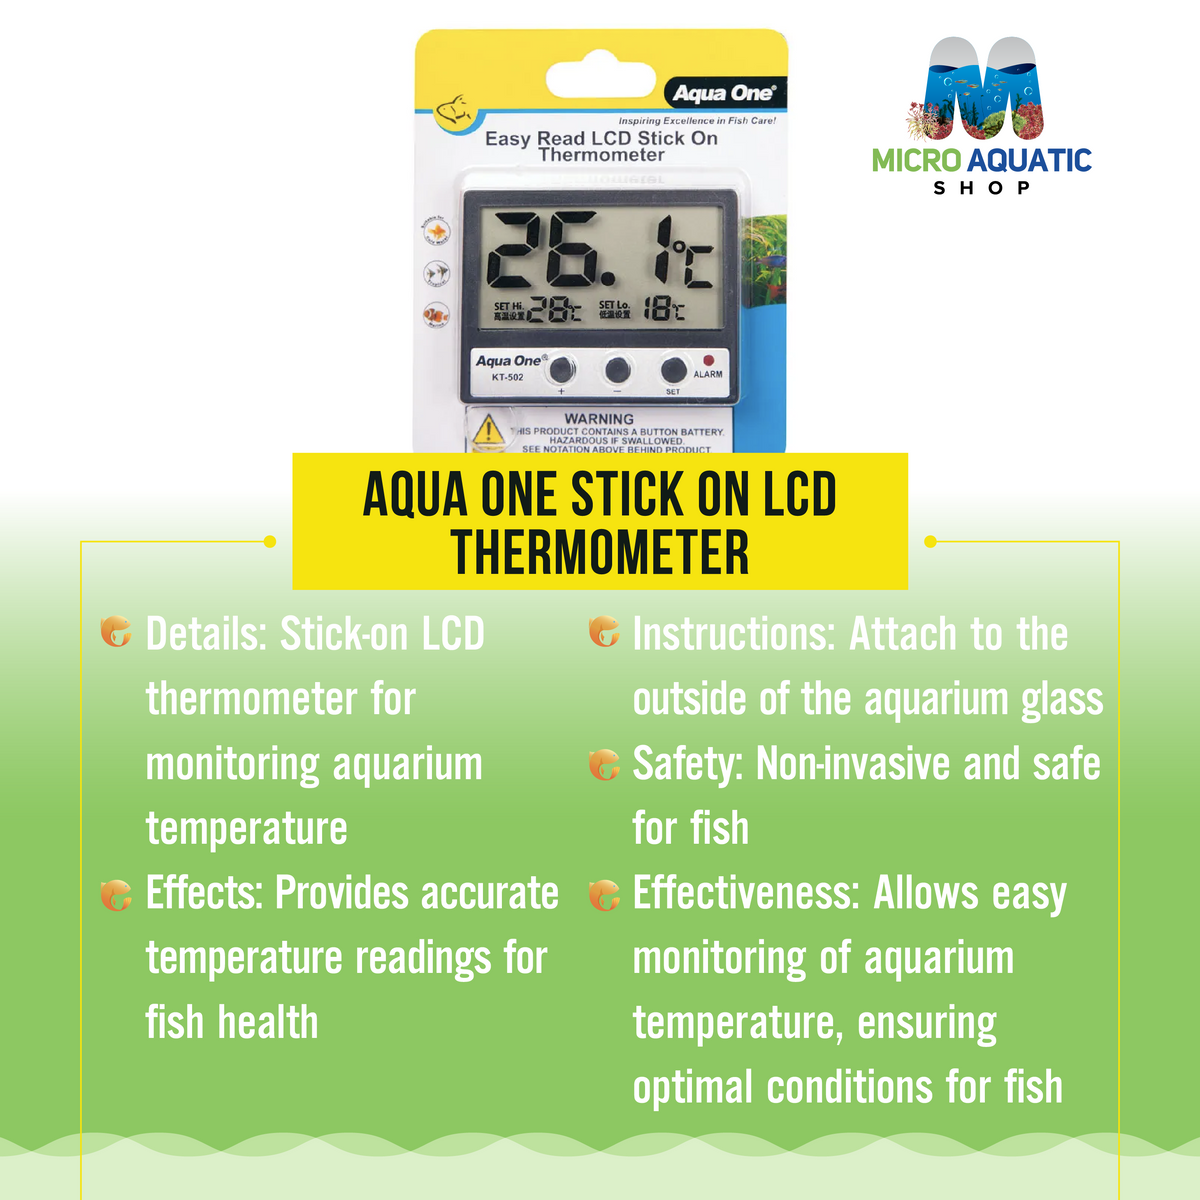 Aqua One Stick On LCD Thermometer